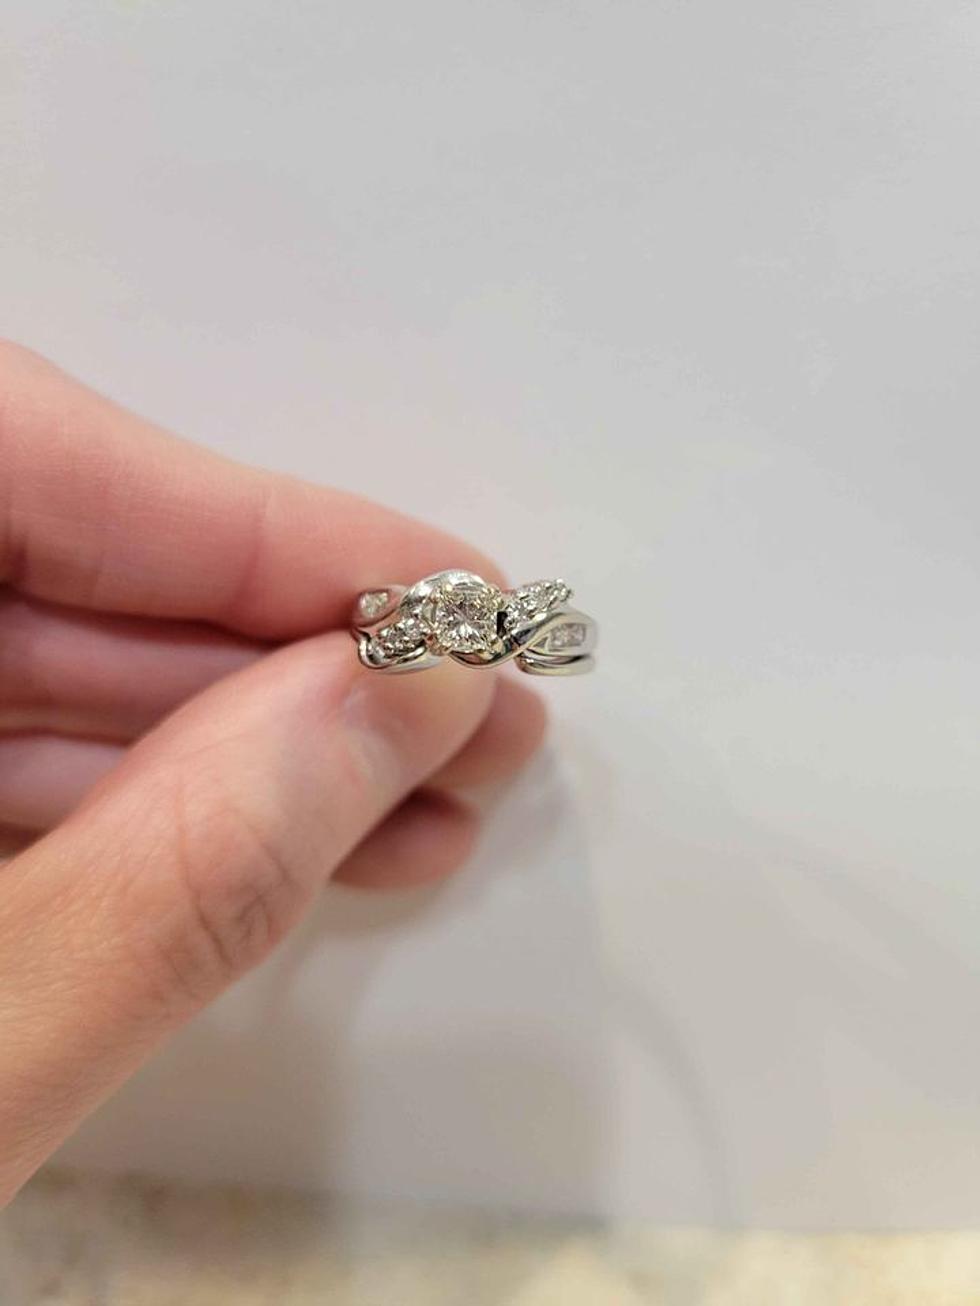 Woman Selling ‘Totally Not Cursed’ Engagement Ring on Facebook